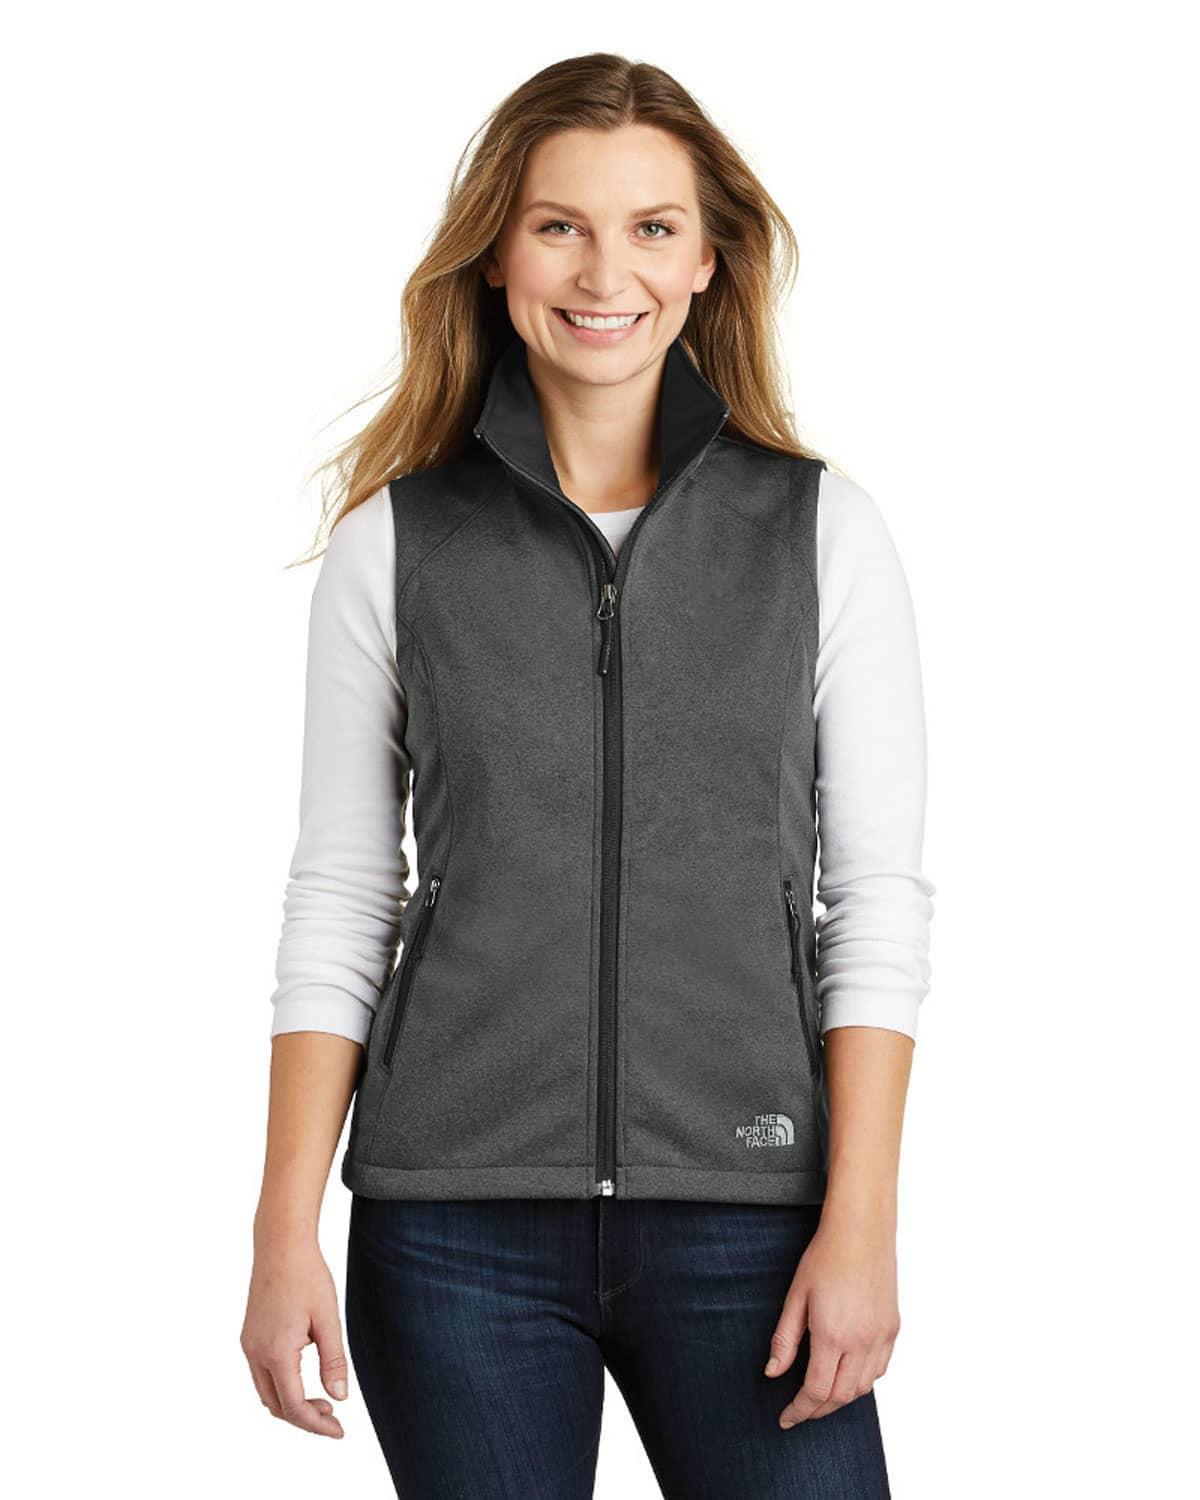 The North Face NF0A3LH1 Women Vest